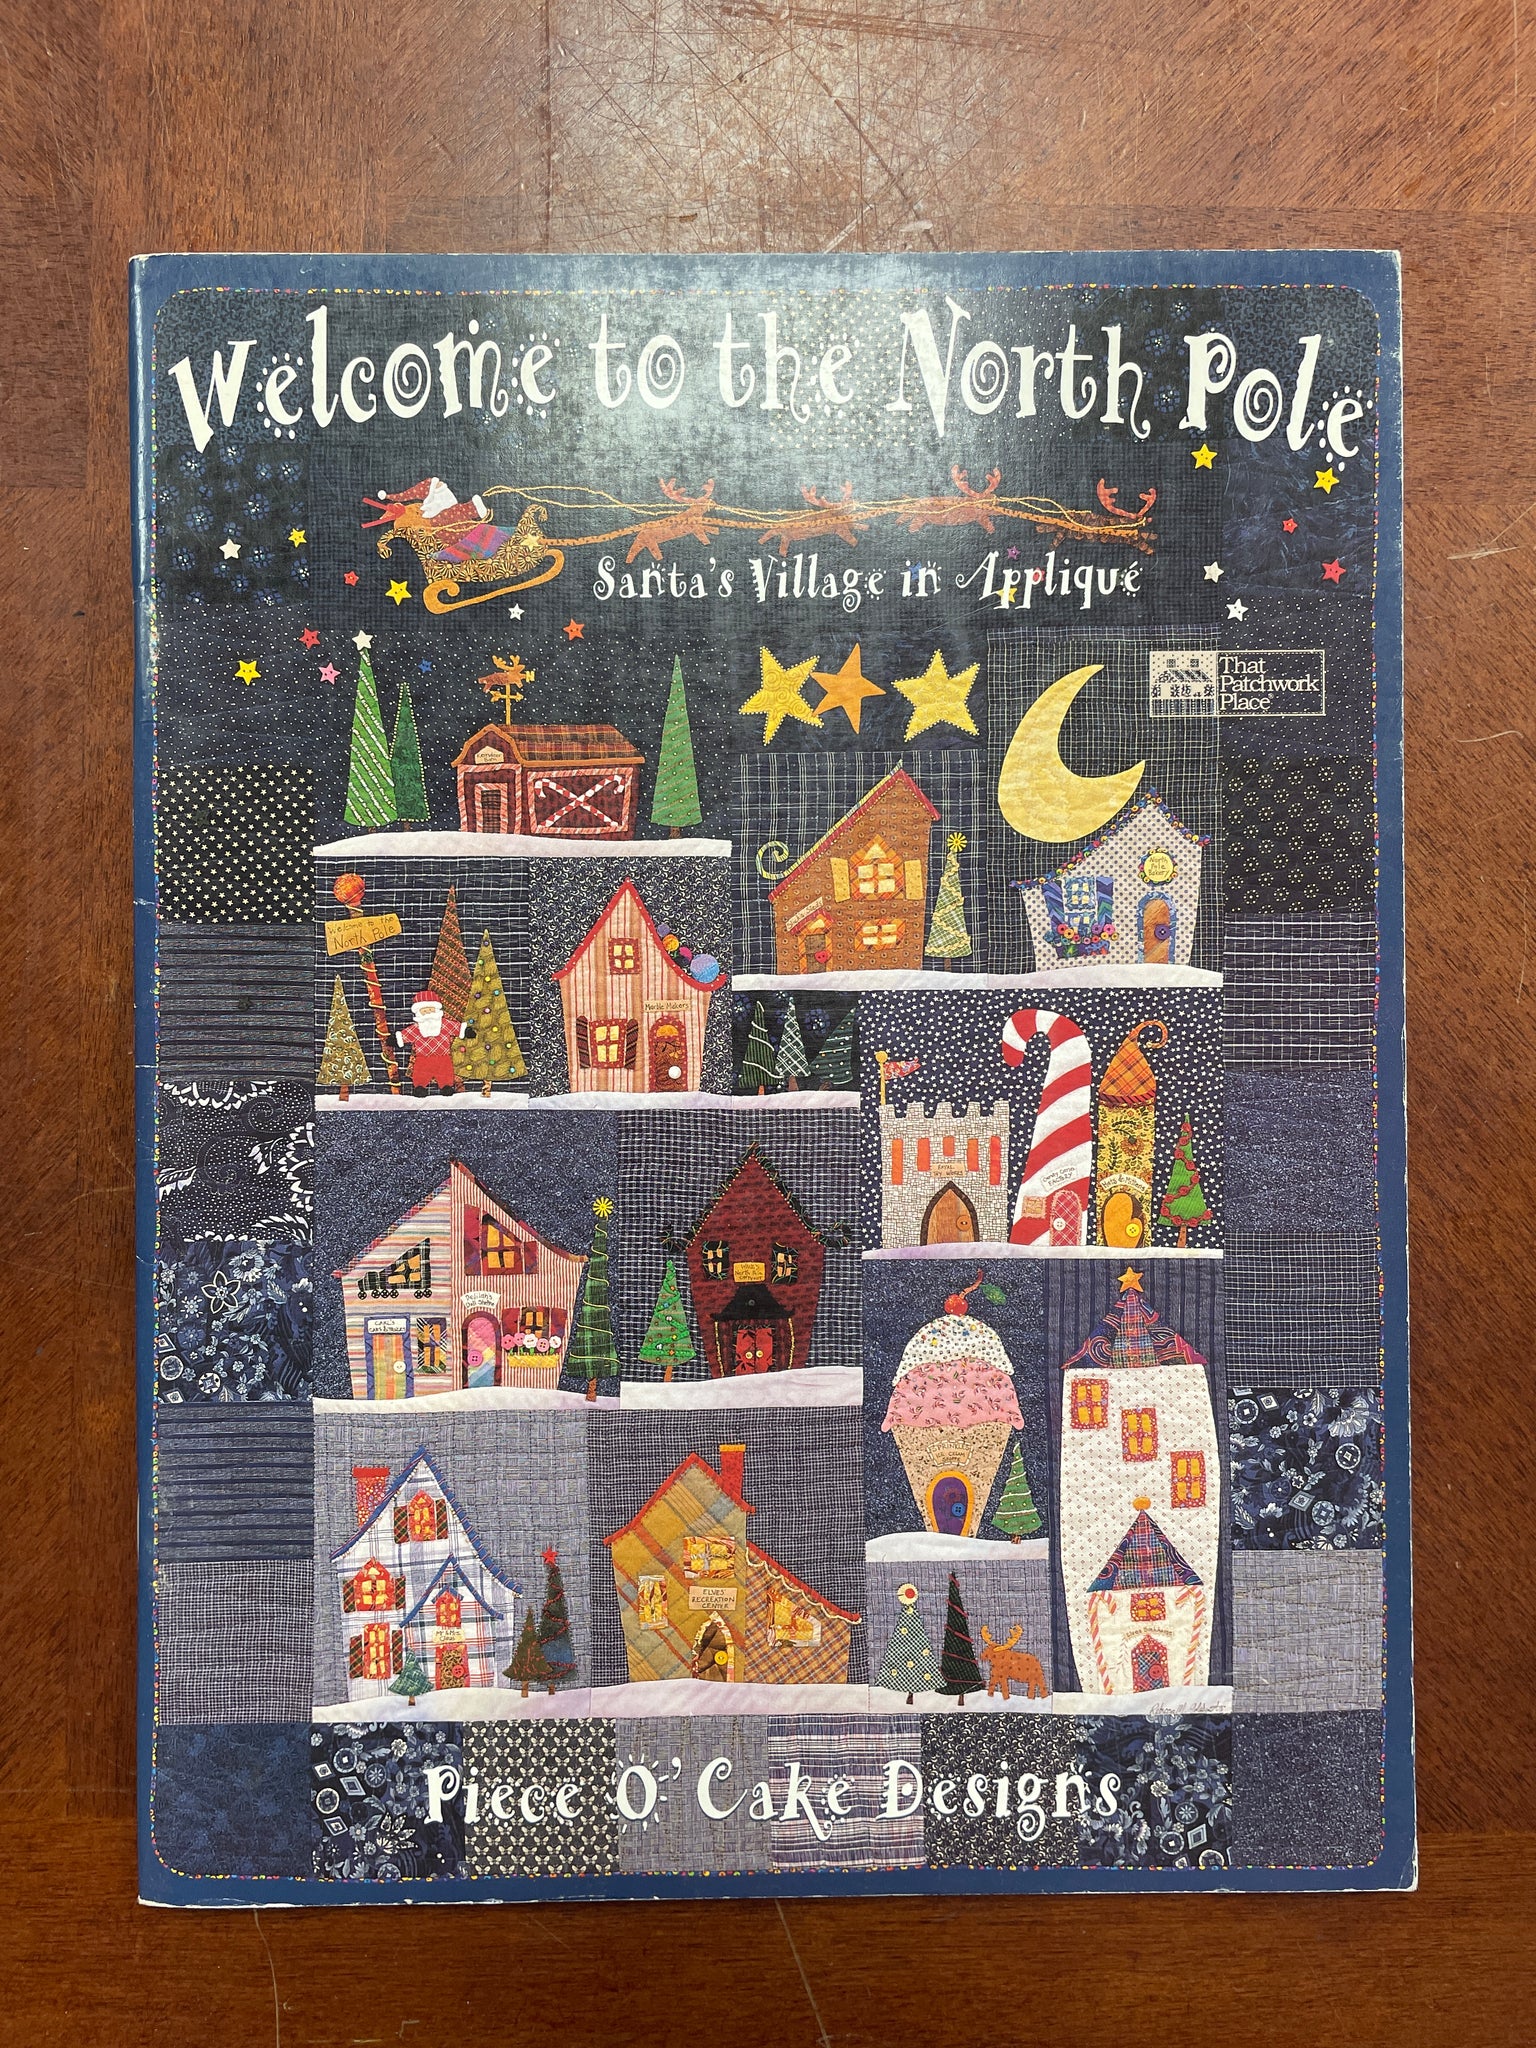 1997 Quilting Book - "Welcome to the North Pole"